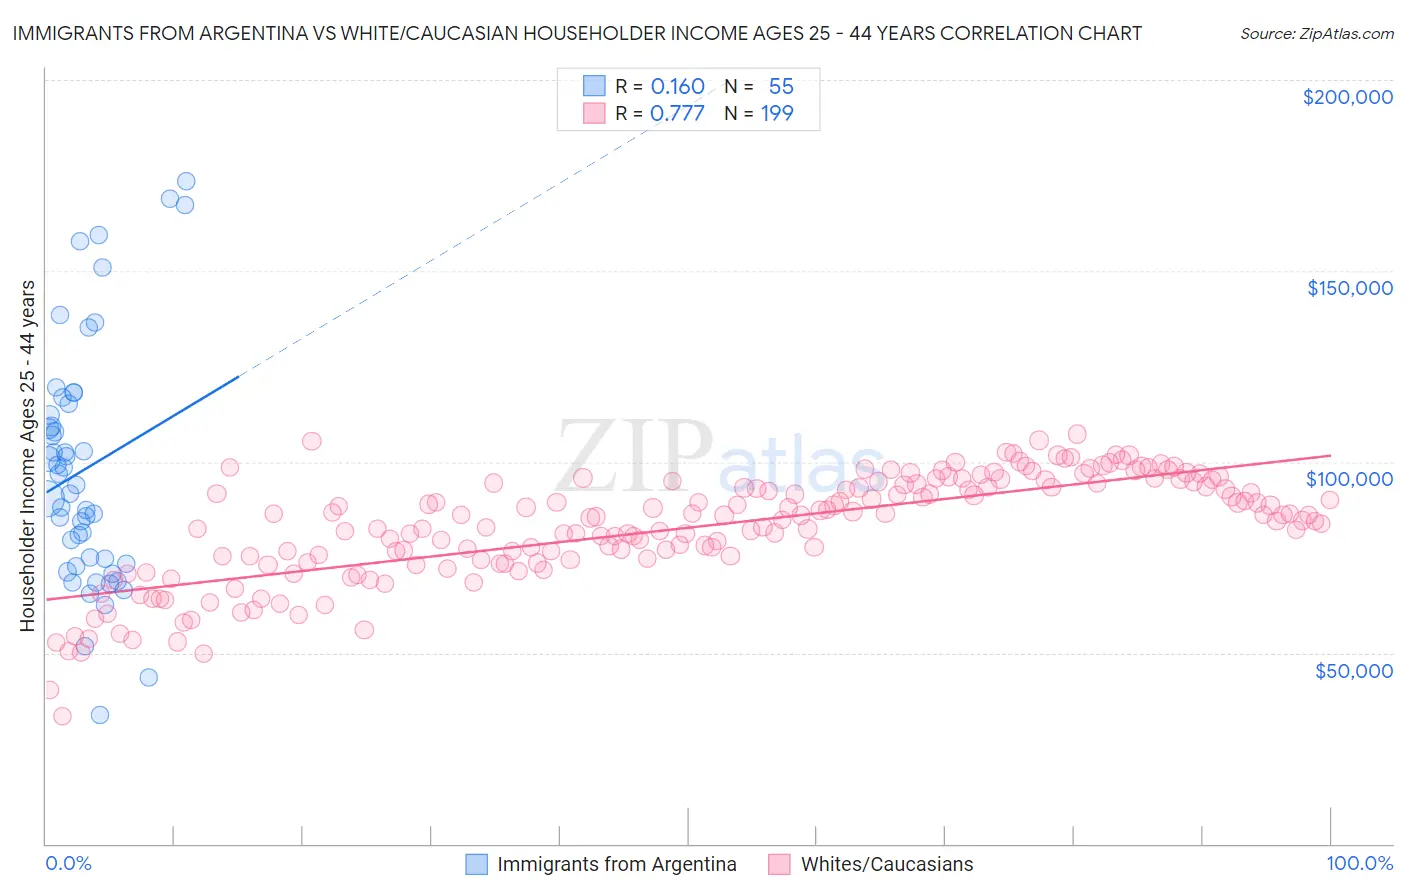 Immigrants from Argentina vs White/Caucasian Householder Income Ages 25 - 44 years